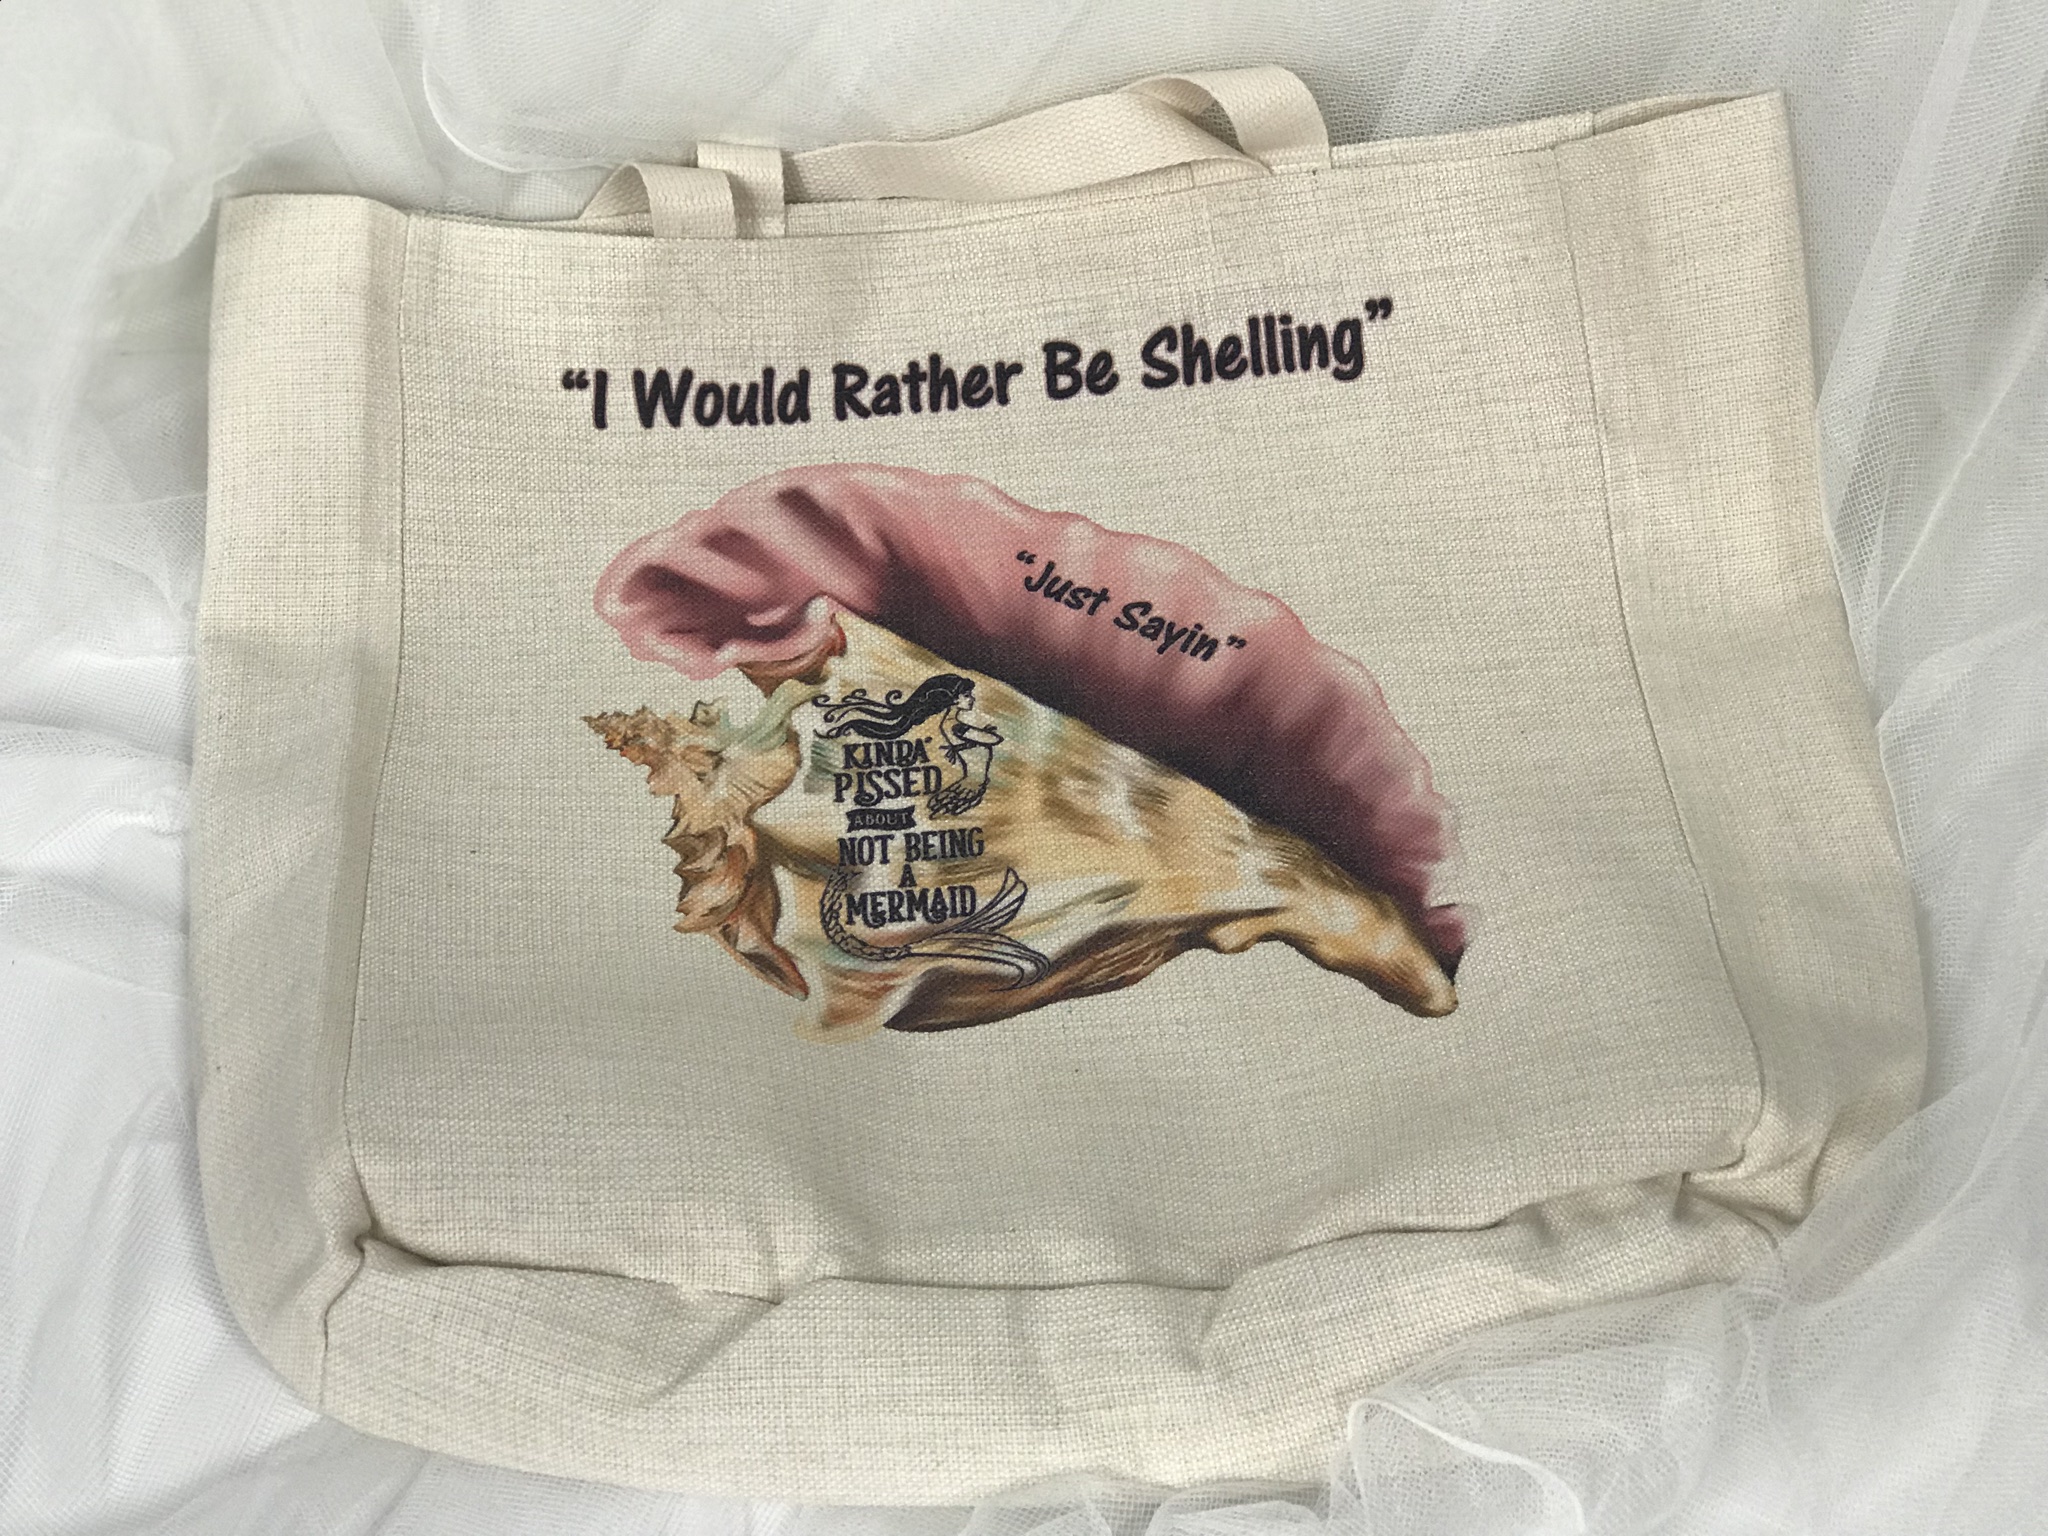 I would rather be shelling made with sublimation printing